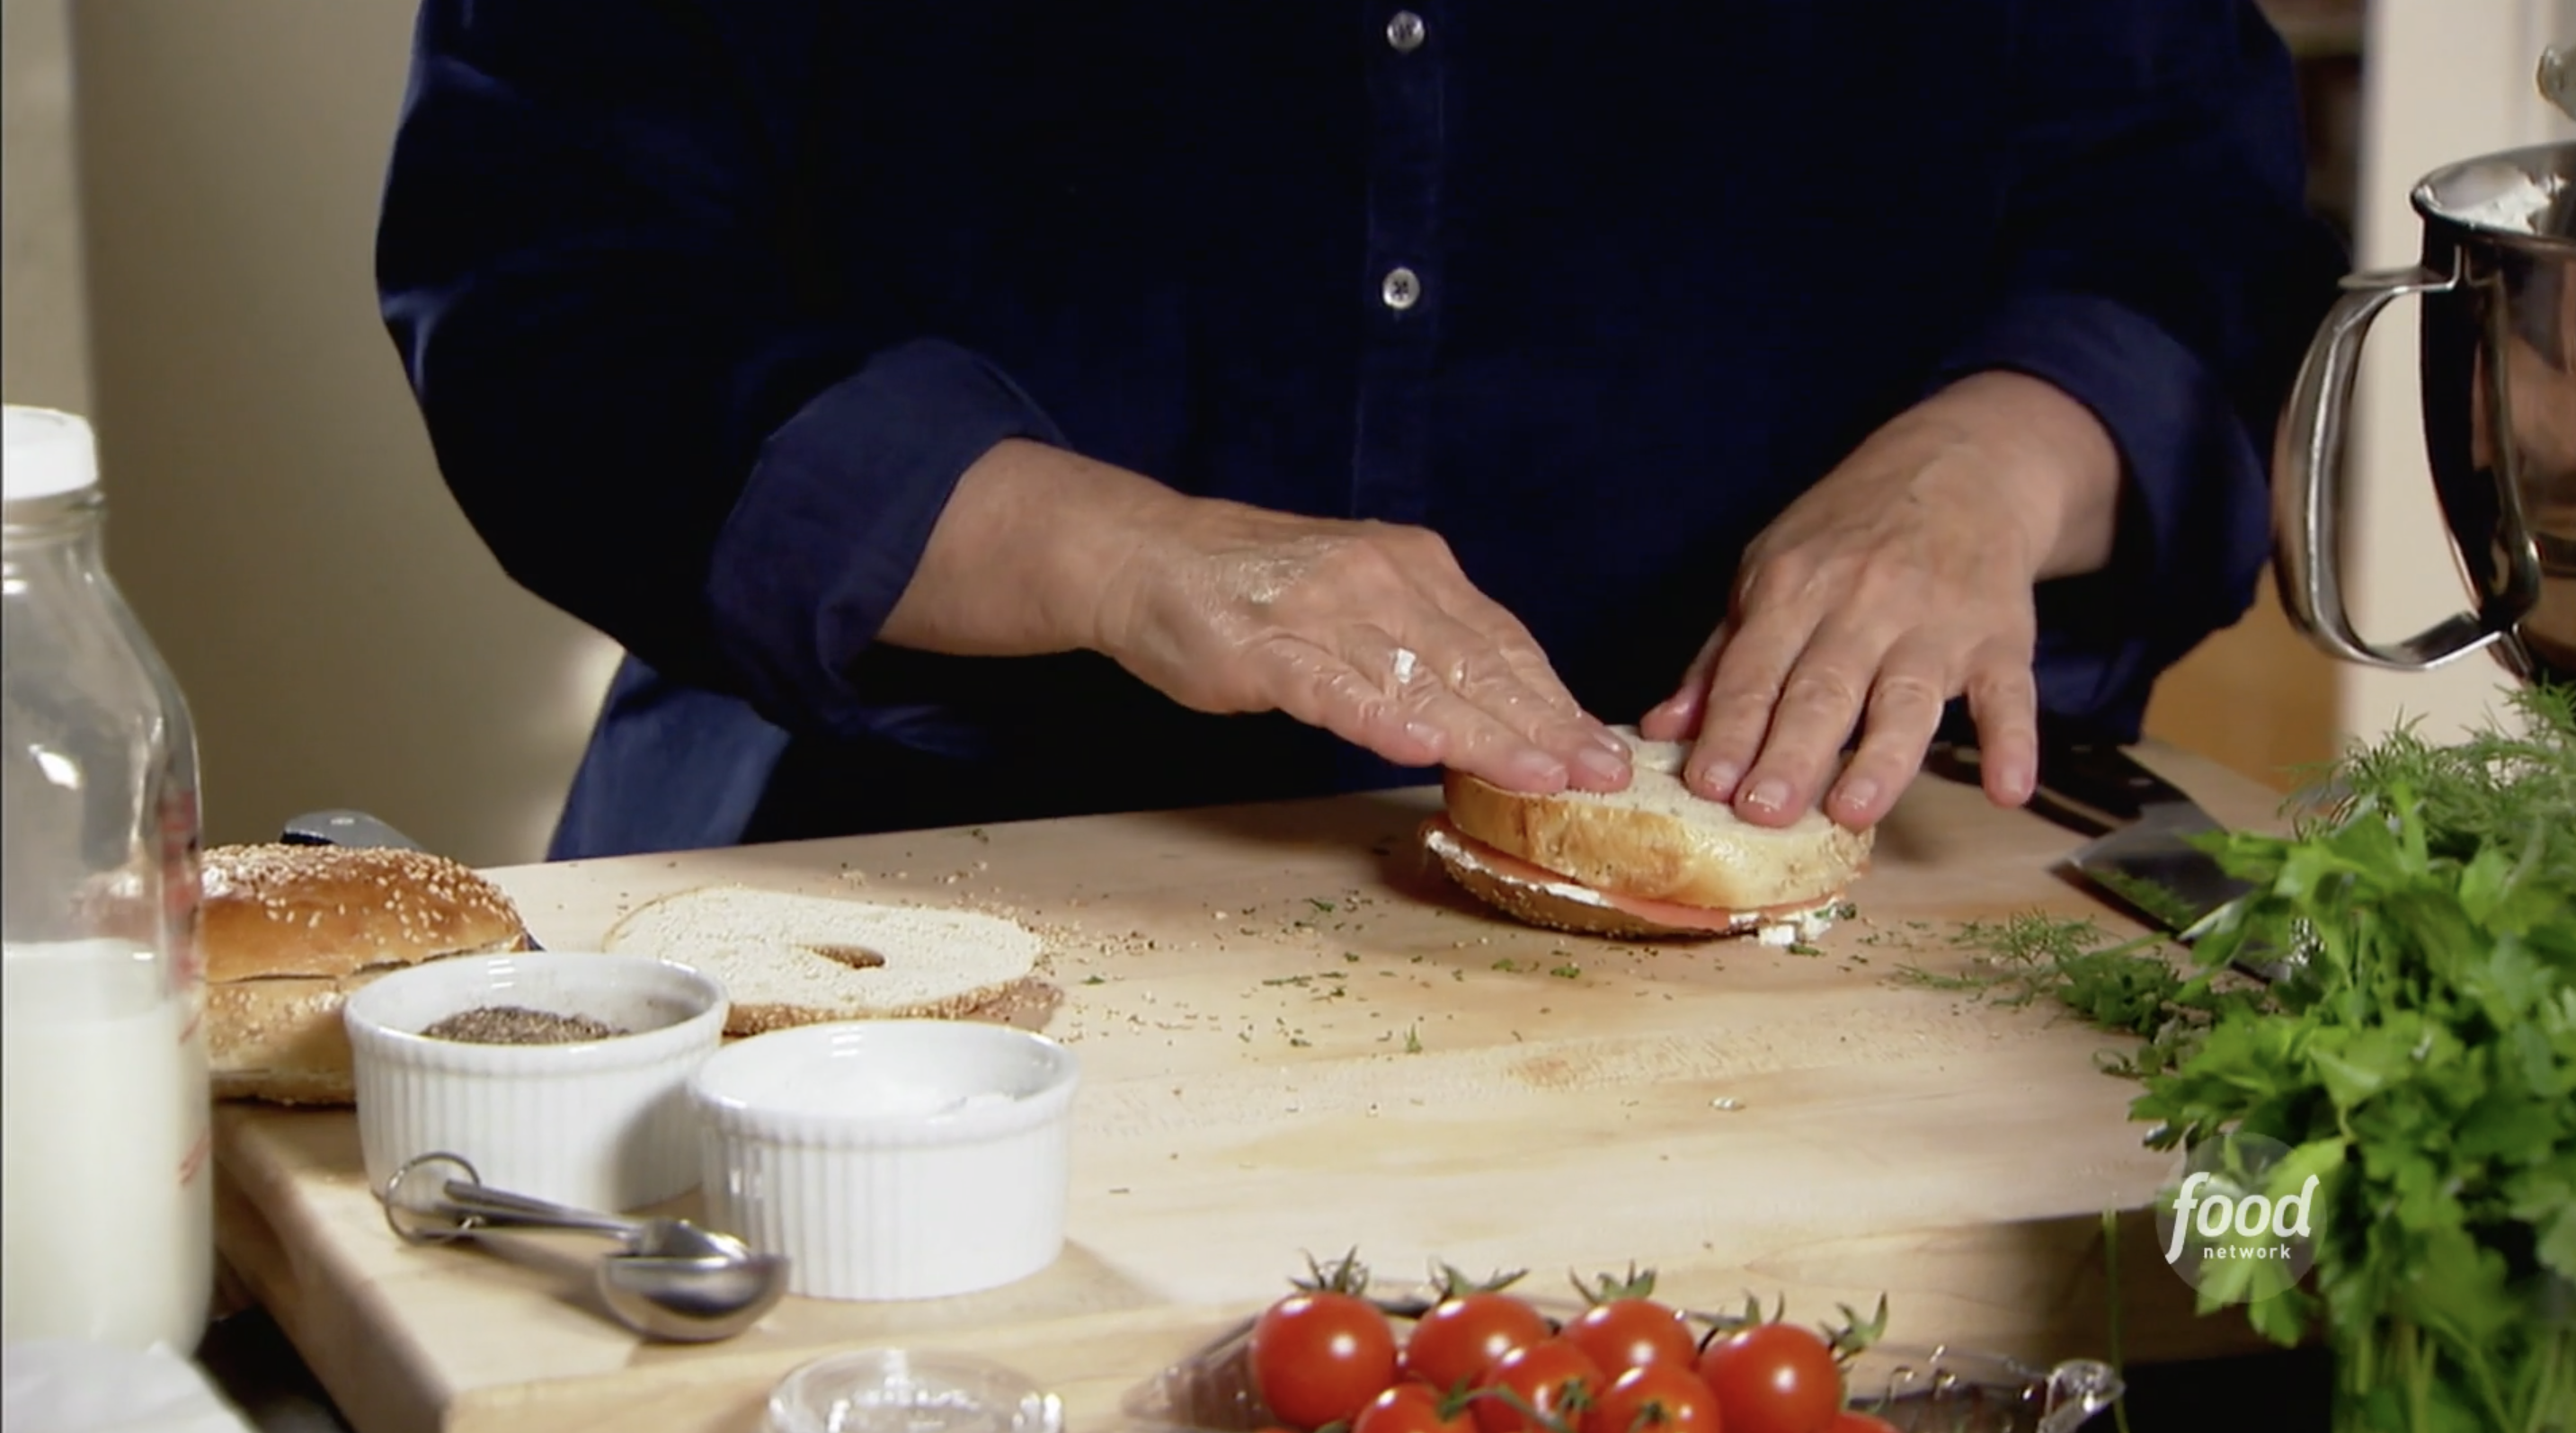 Ina prepares her bagel with lox and cream cheese